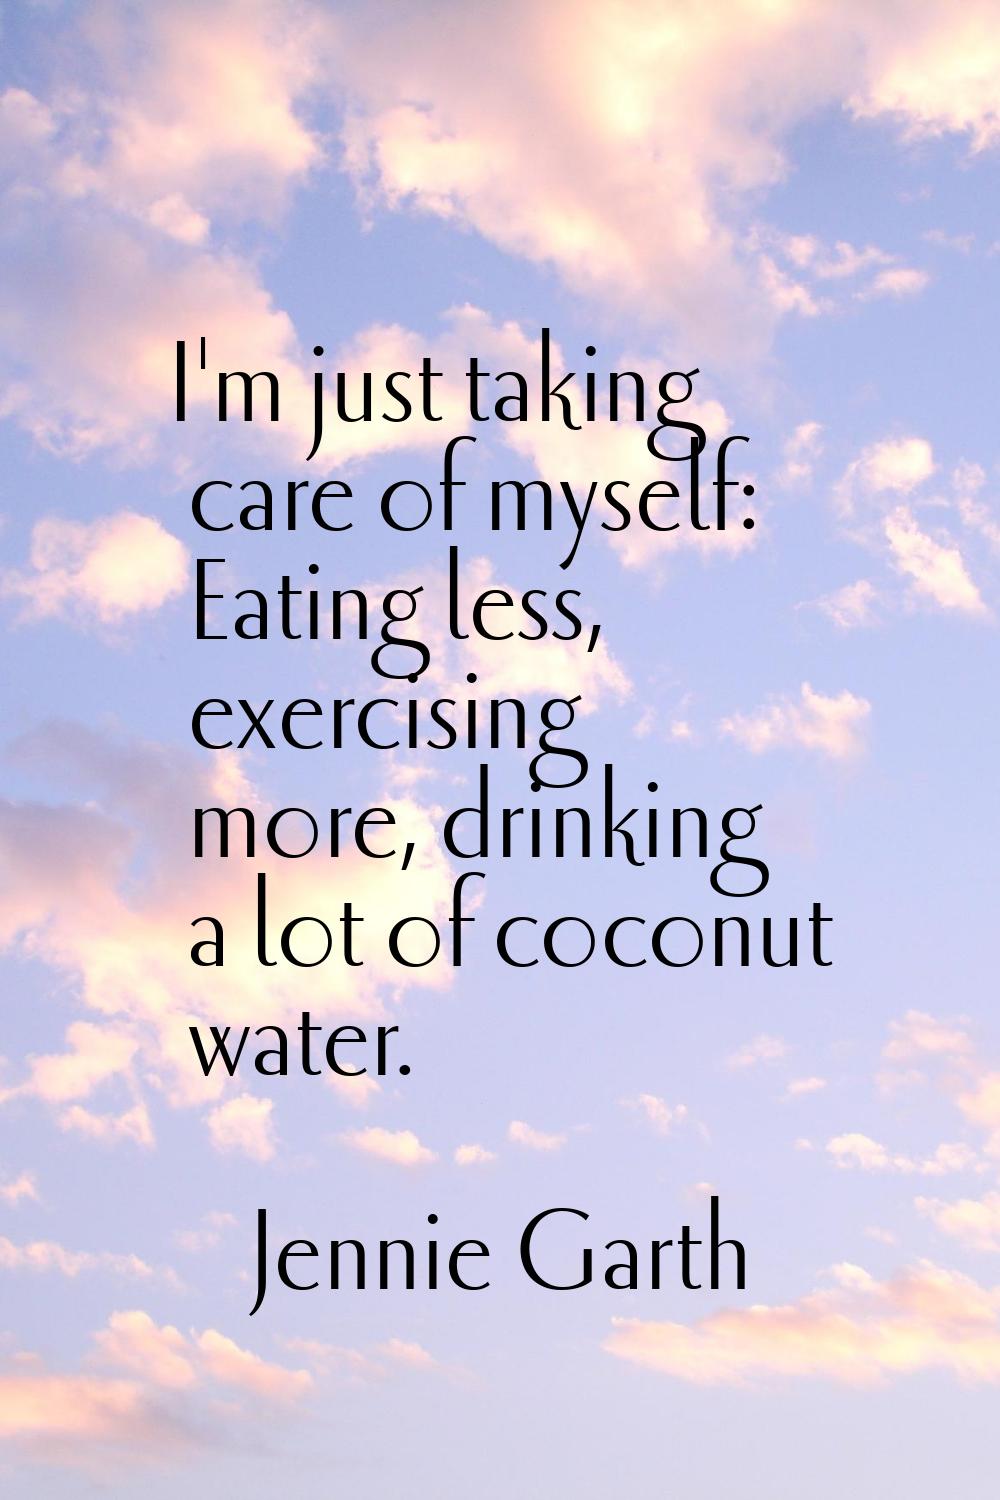 I'm just taking care of myself: Eating less, exercising more, drinking a lot of coconut water.